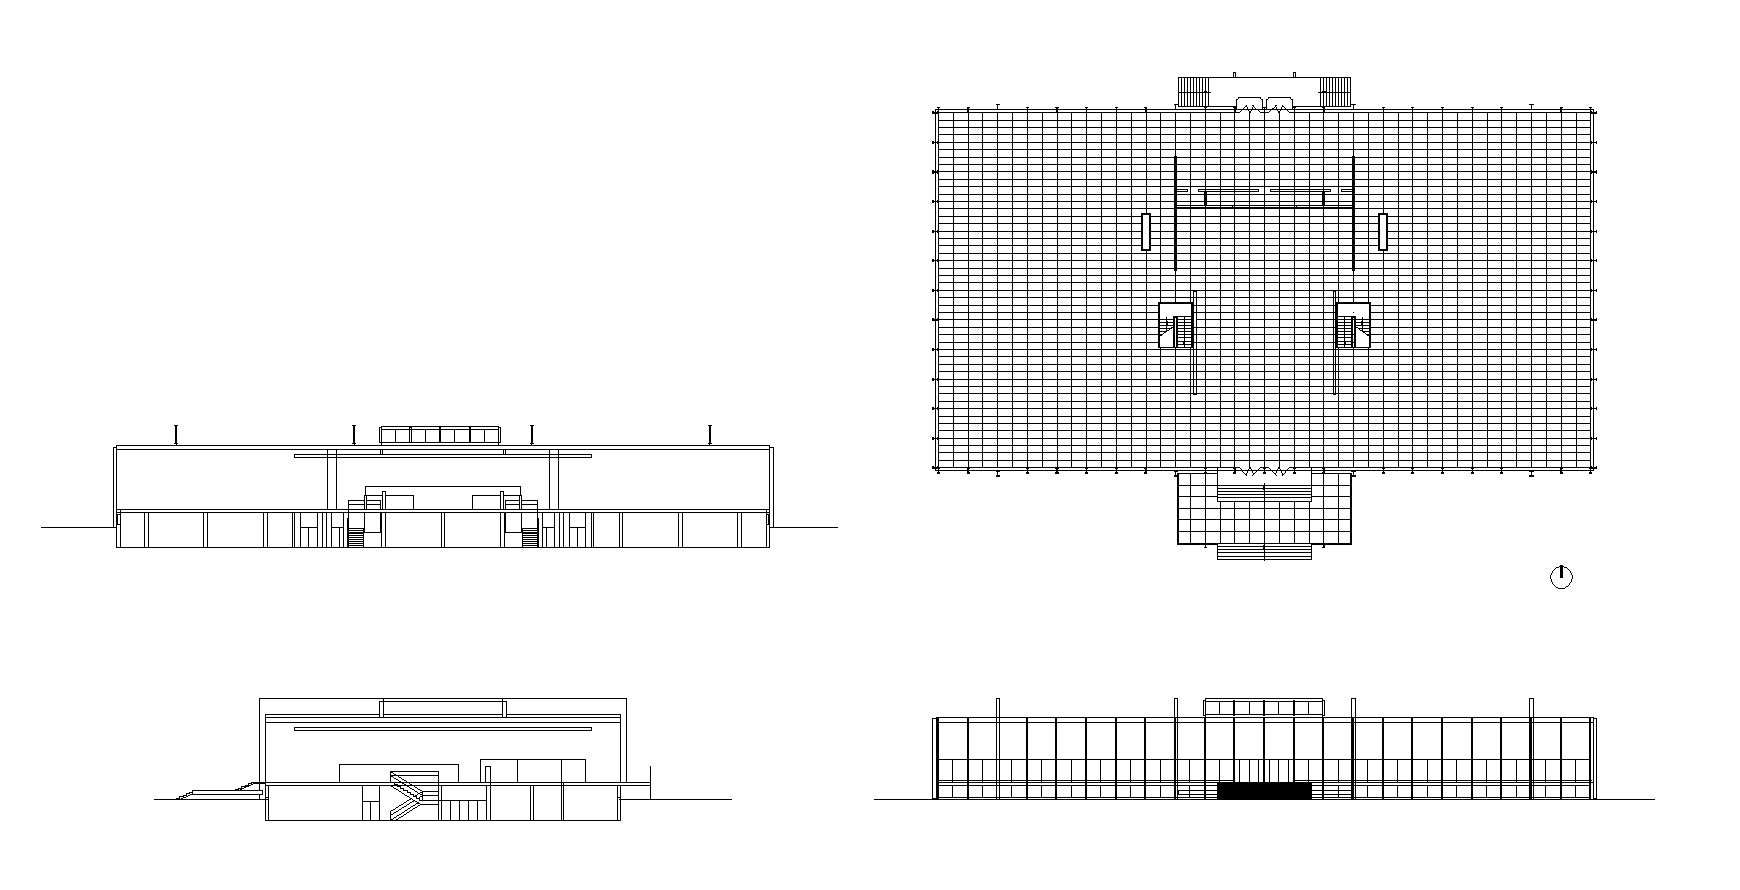 【Famous Architecture Project】Crown Hall- Ludwig Mies van der Rohe-CAD Drawings